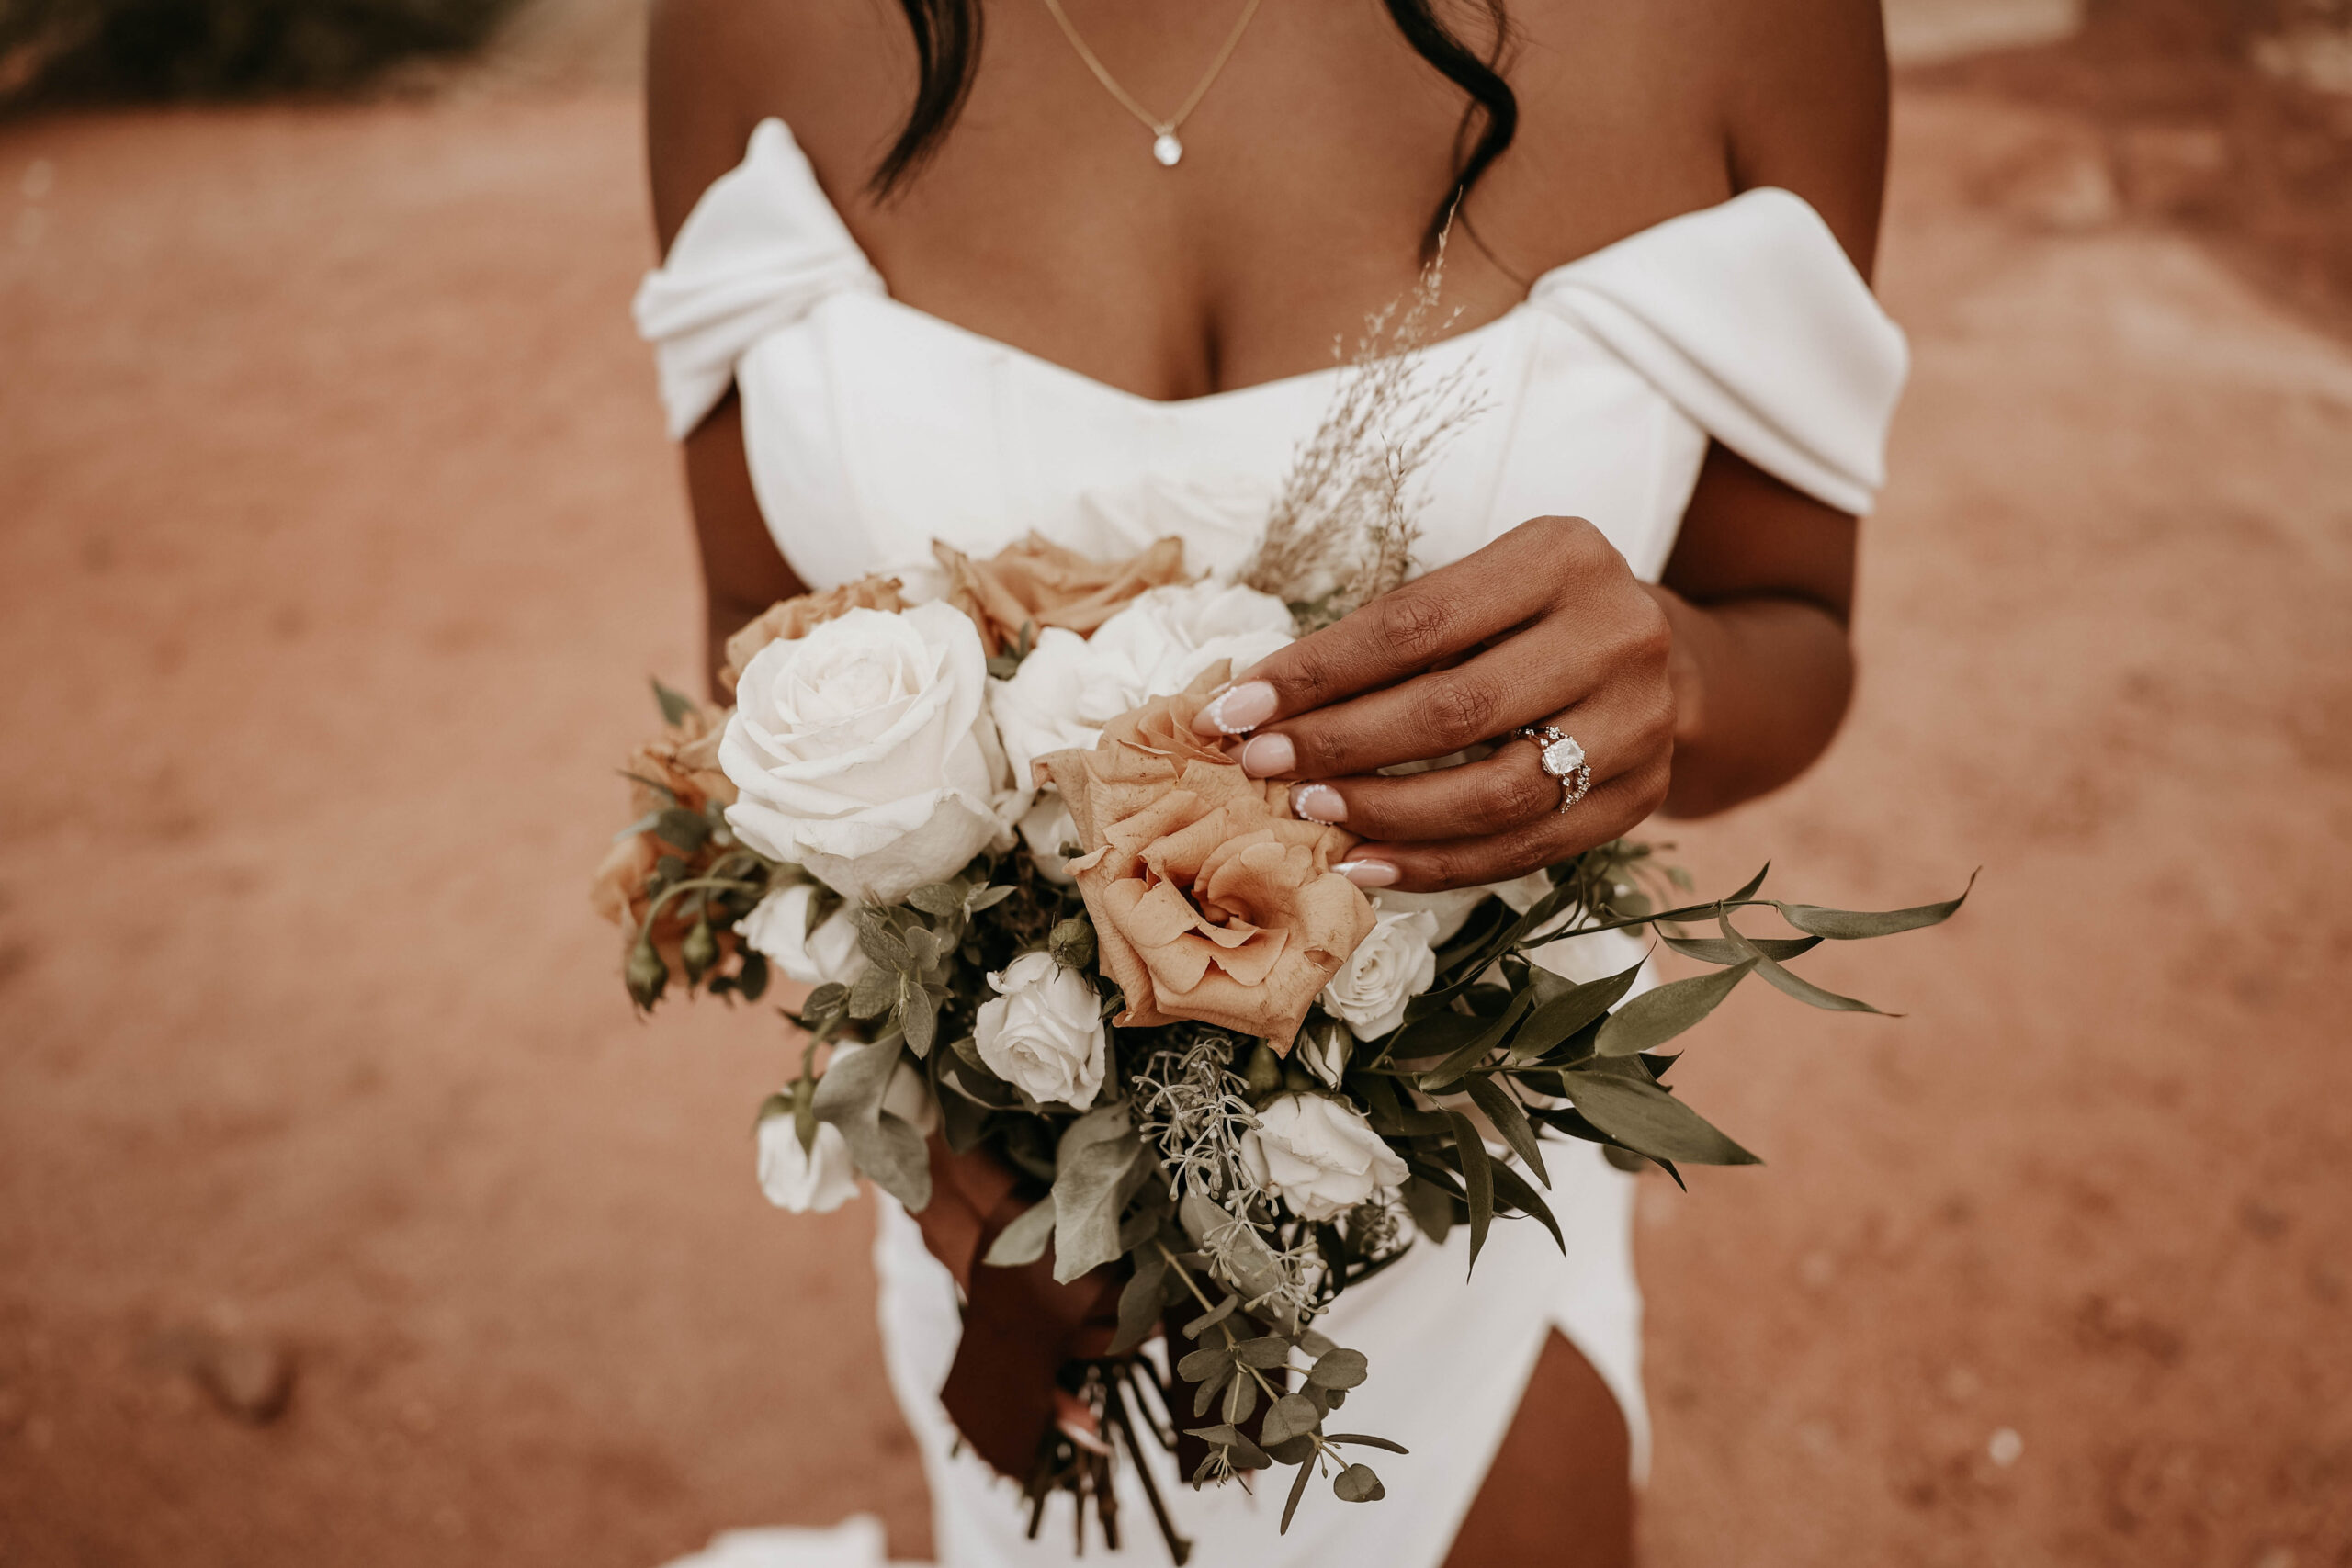 detail shot of bride's bouquet and ring at outdoor wedding in Colorado